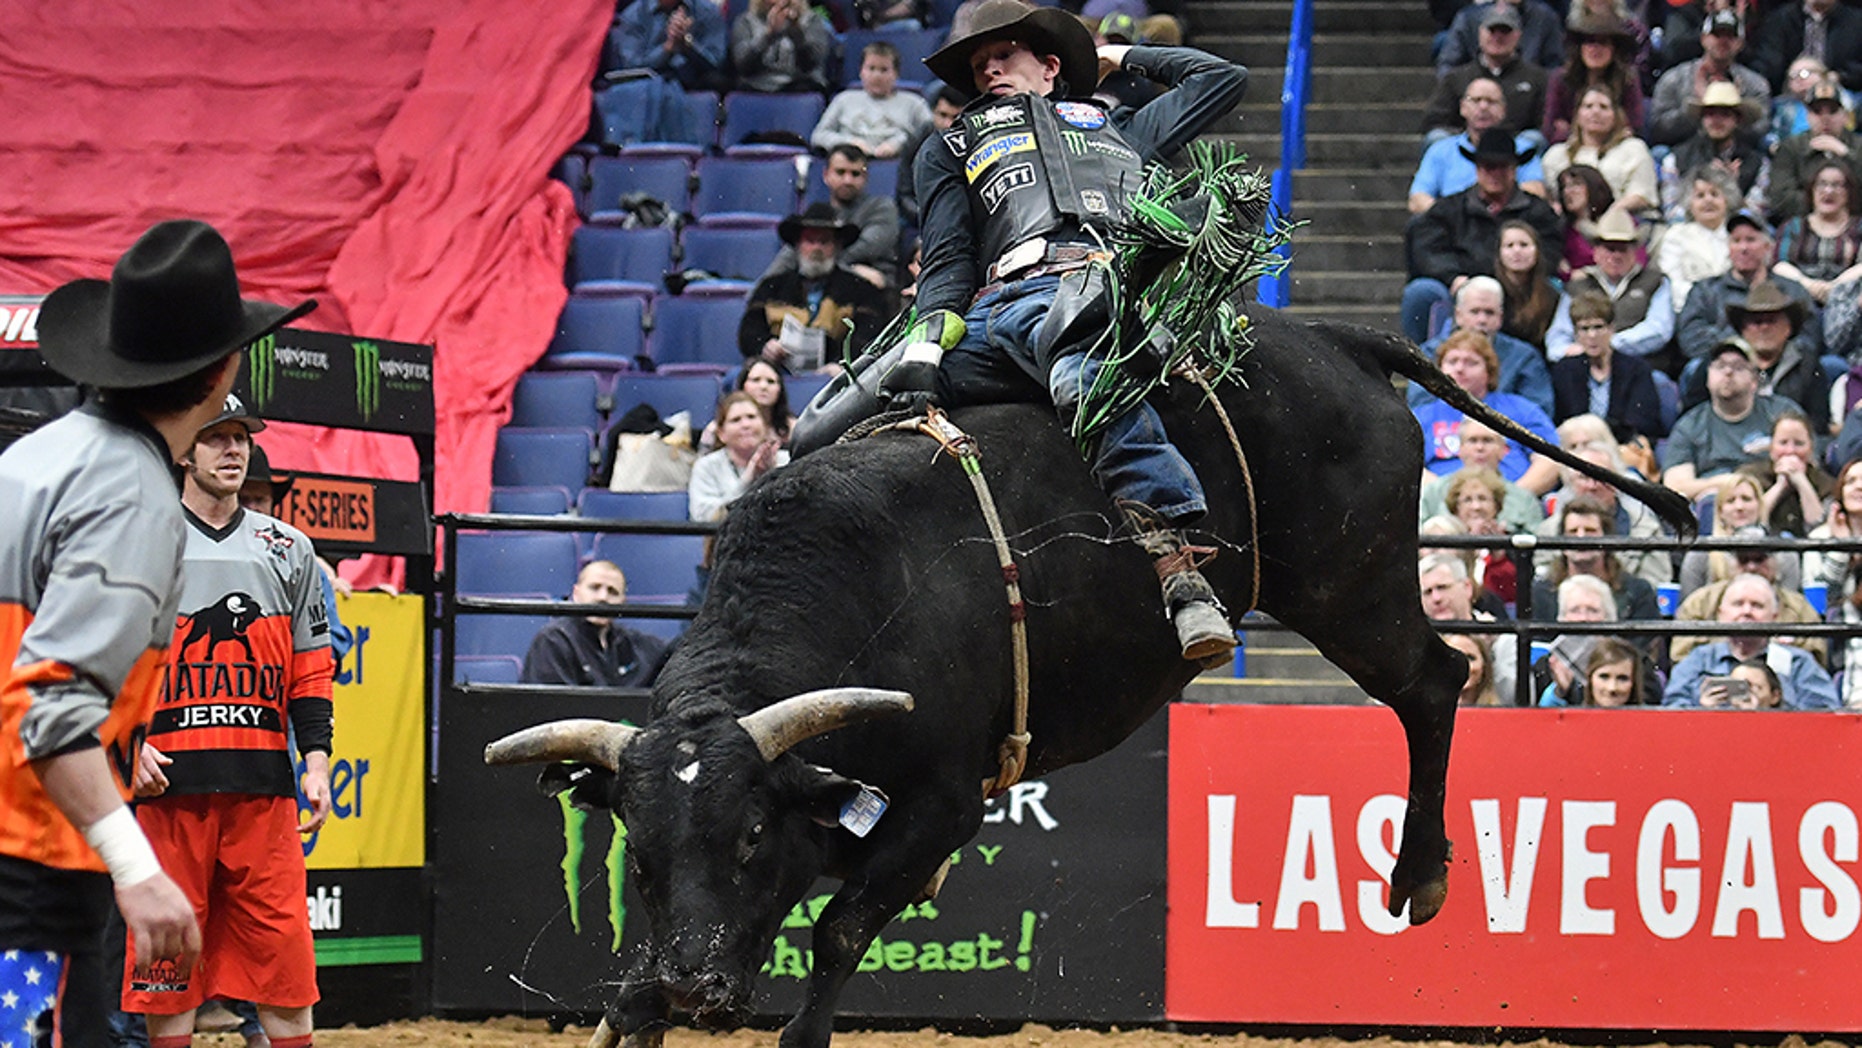 Professional bull rider, 25, dies after being injured at Colorado event Fox News